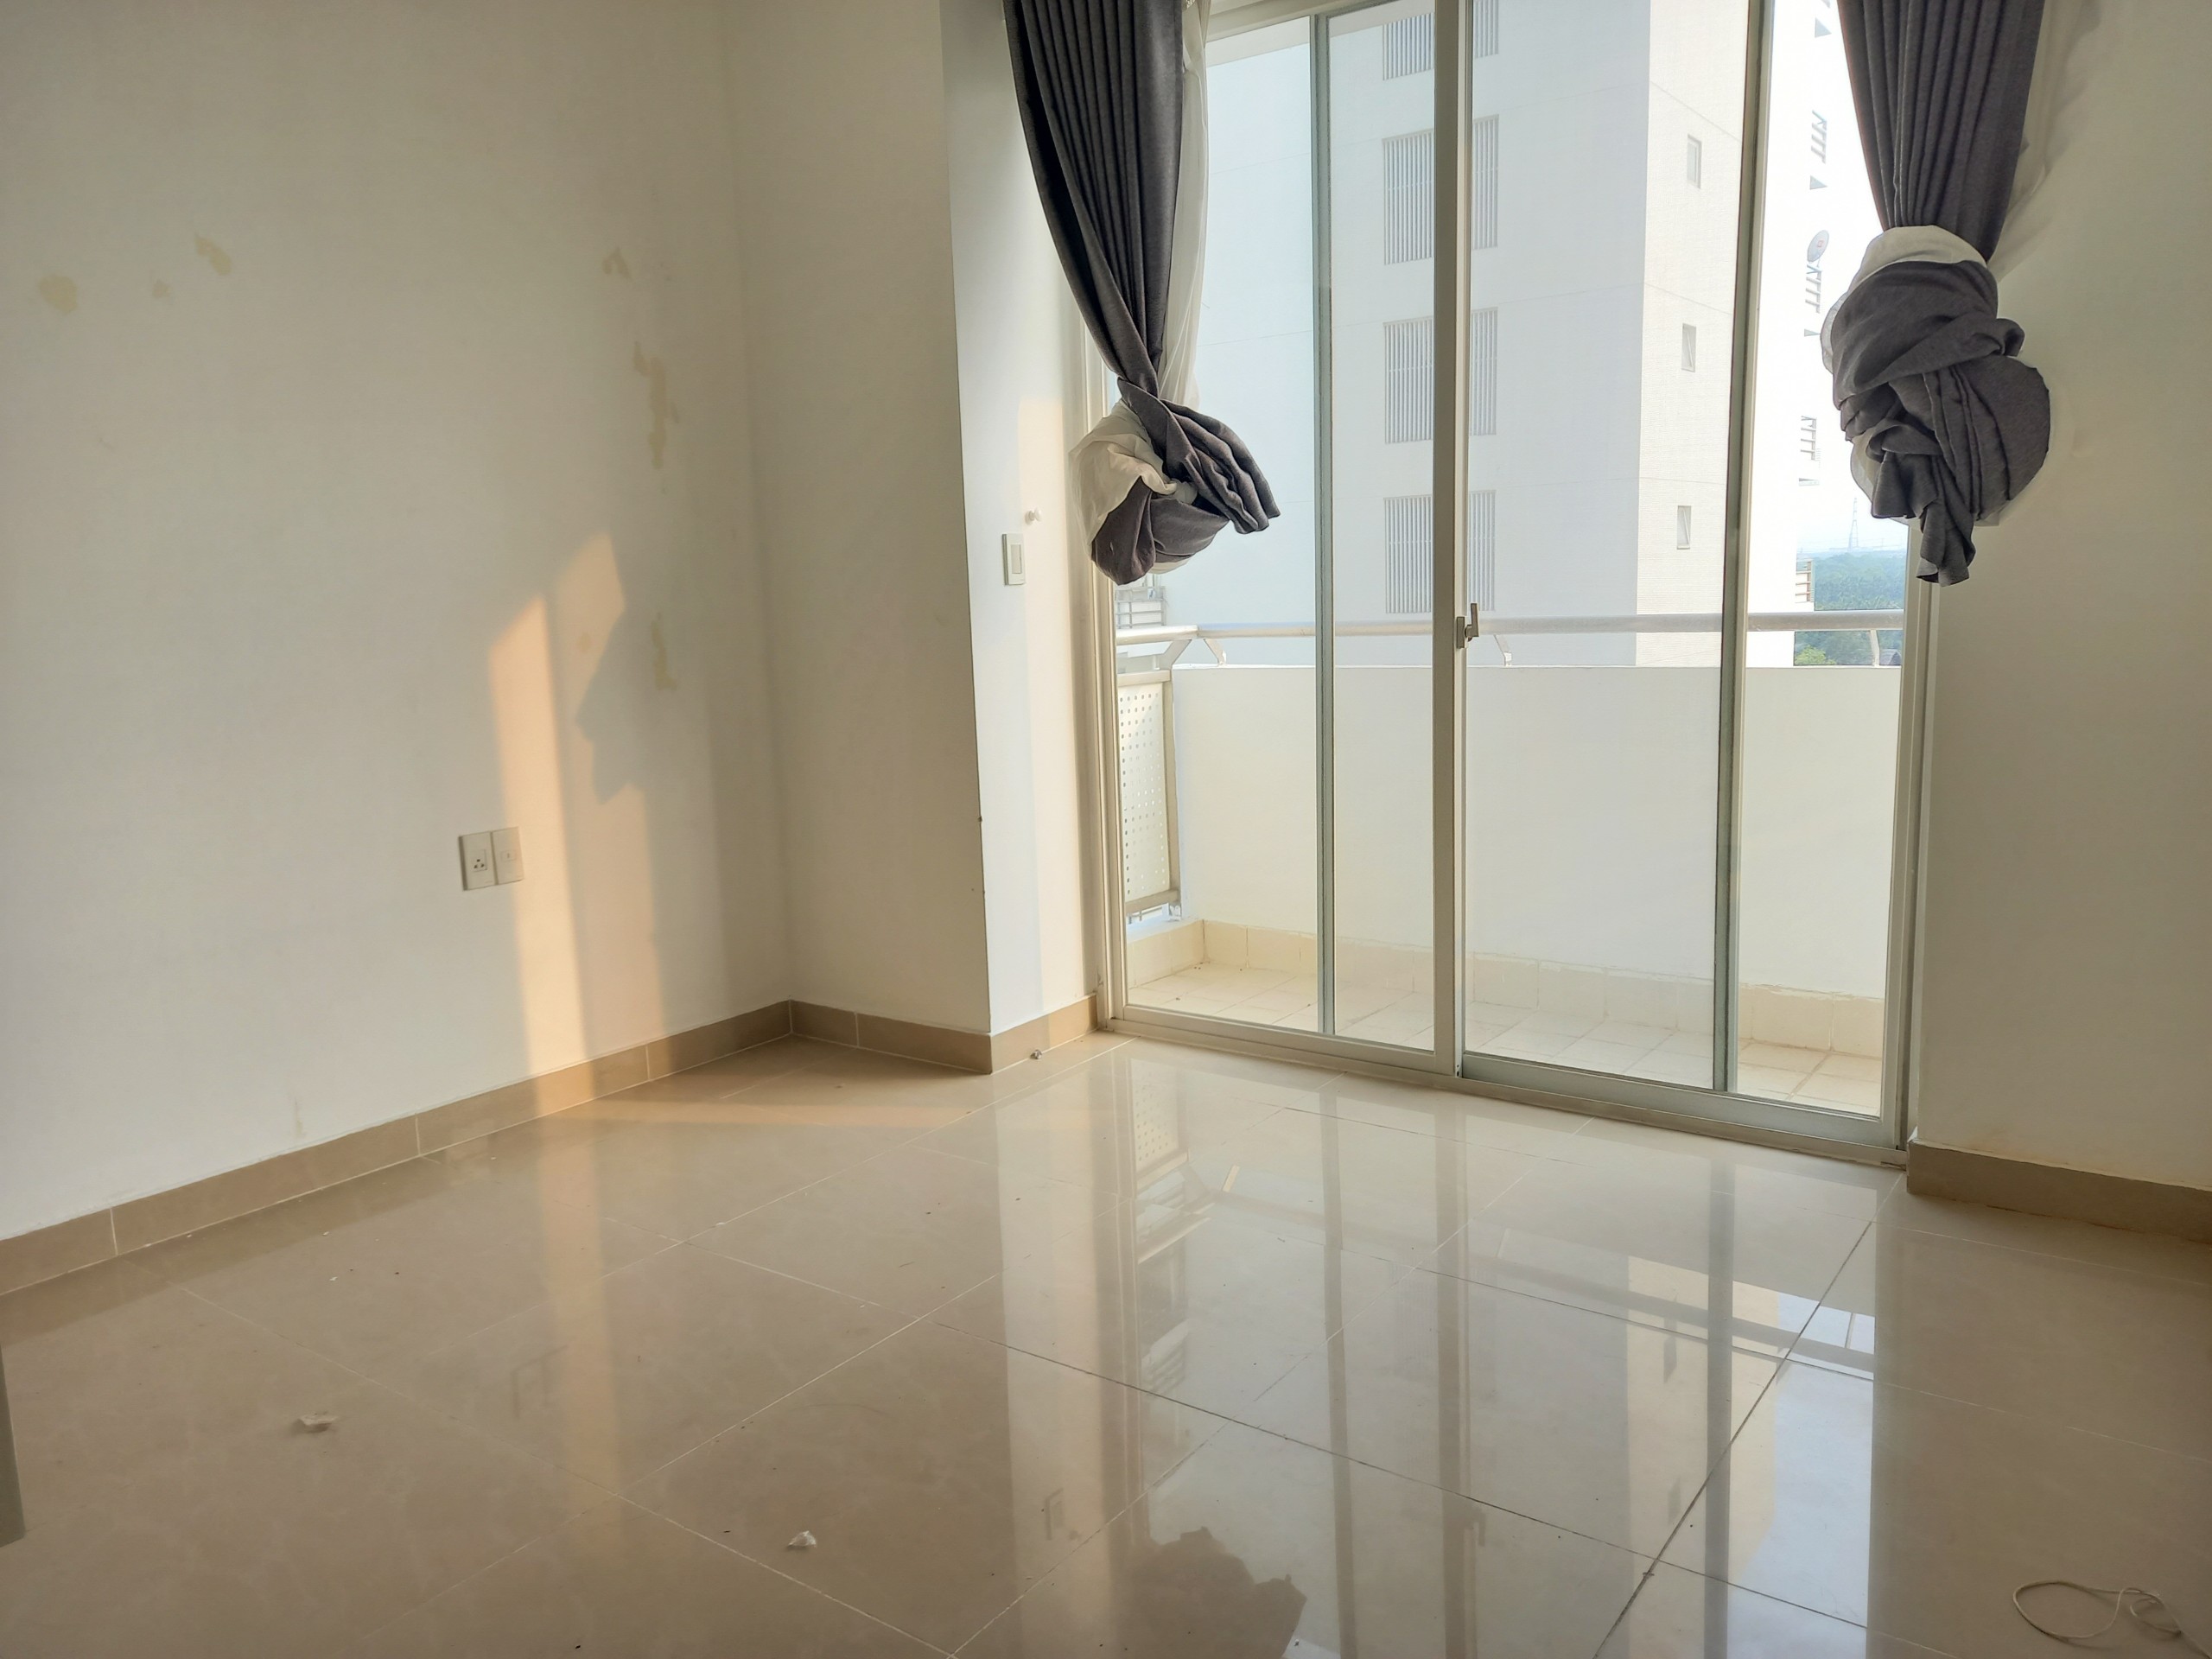 No-option-apartment-for-rent-near-SSIS-school (7)